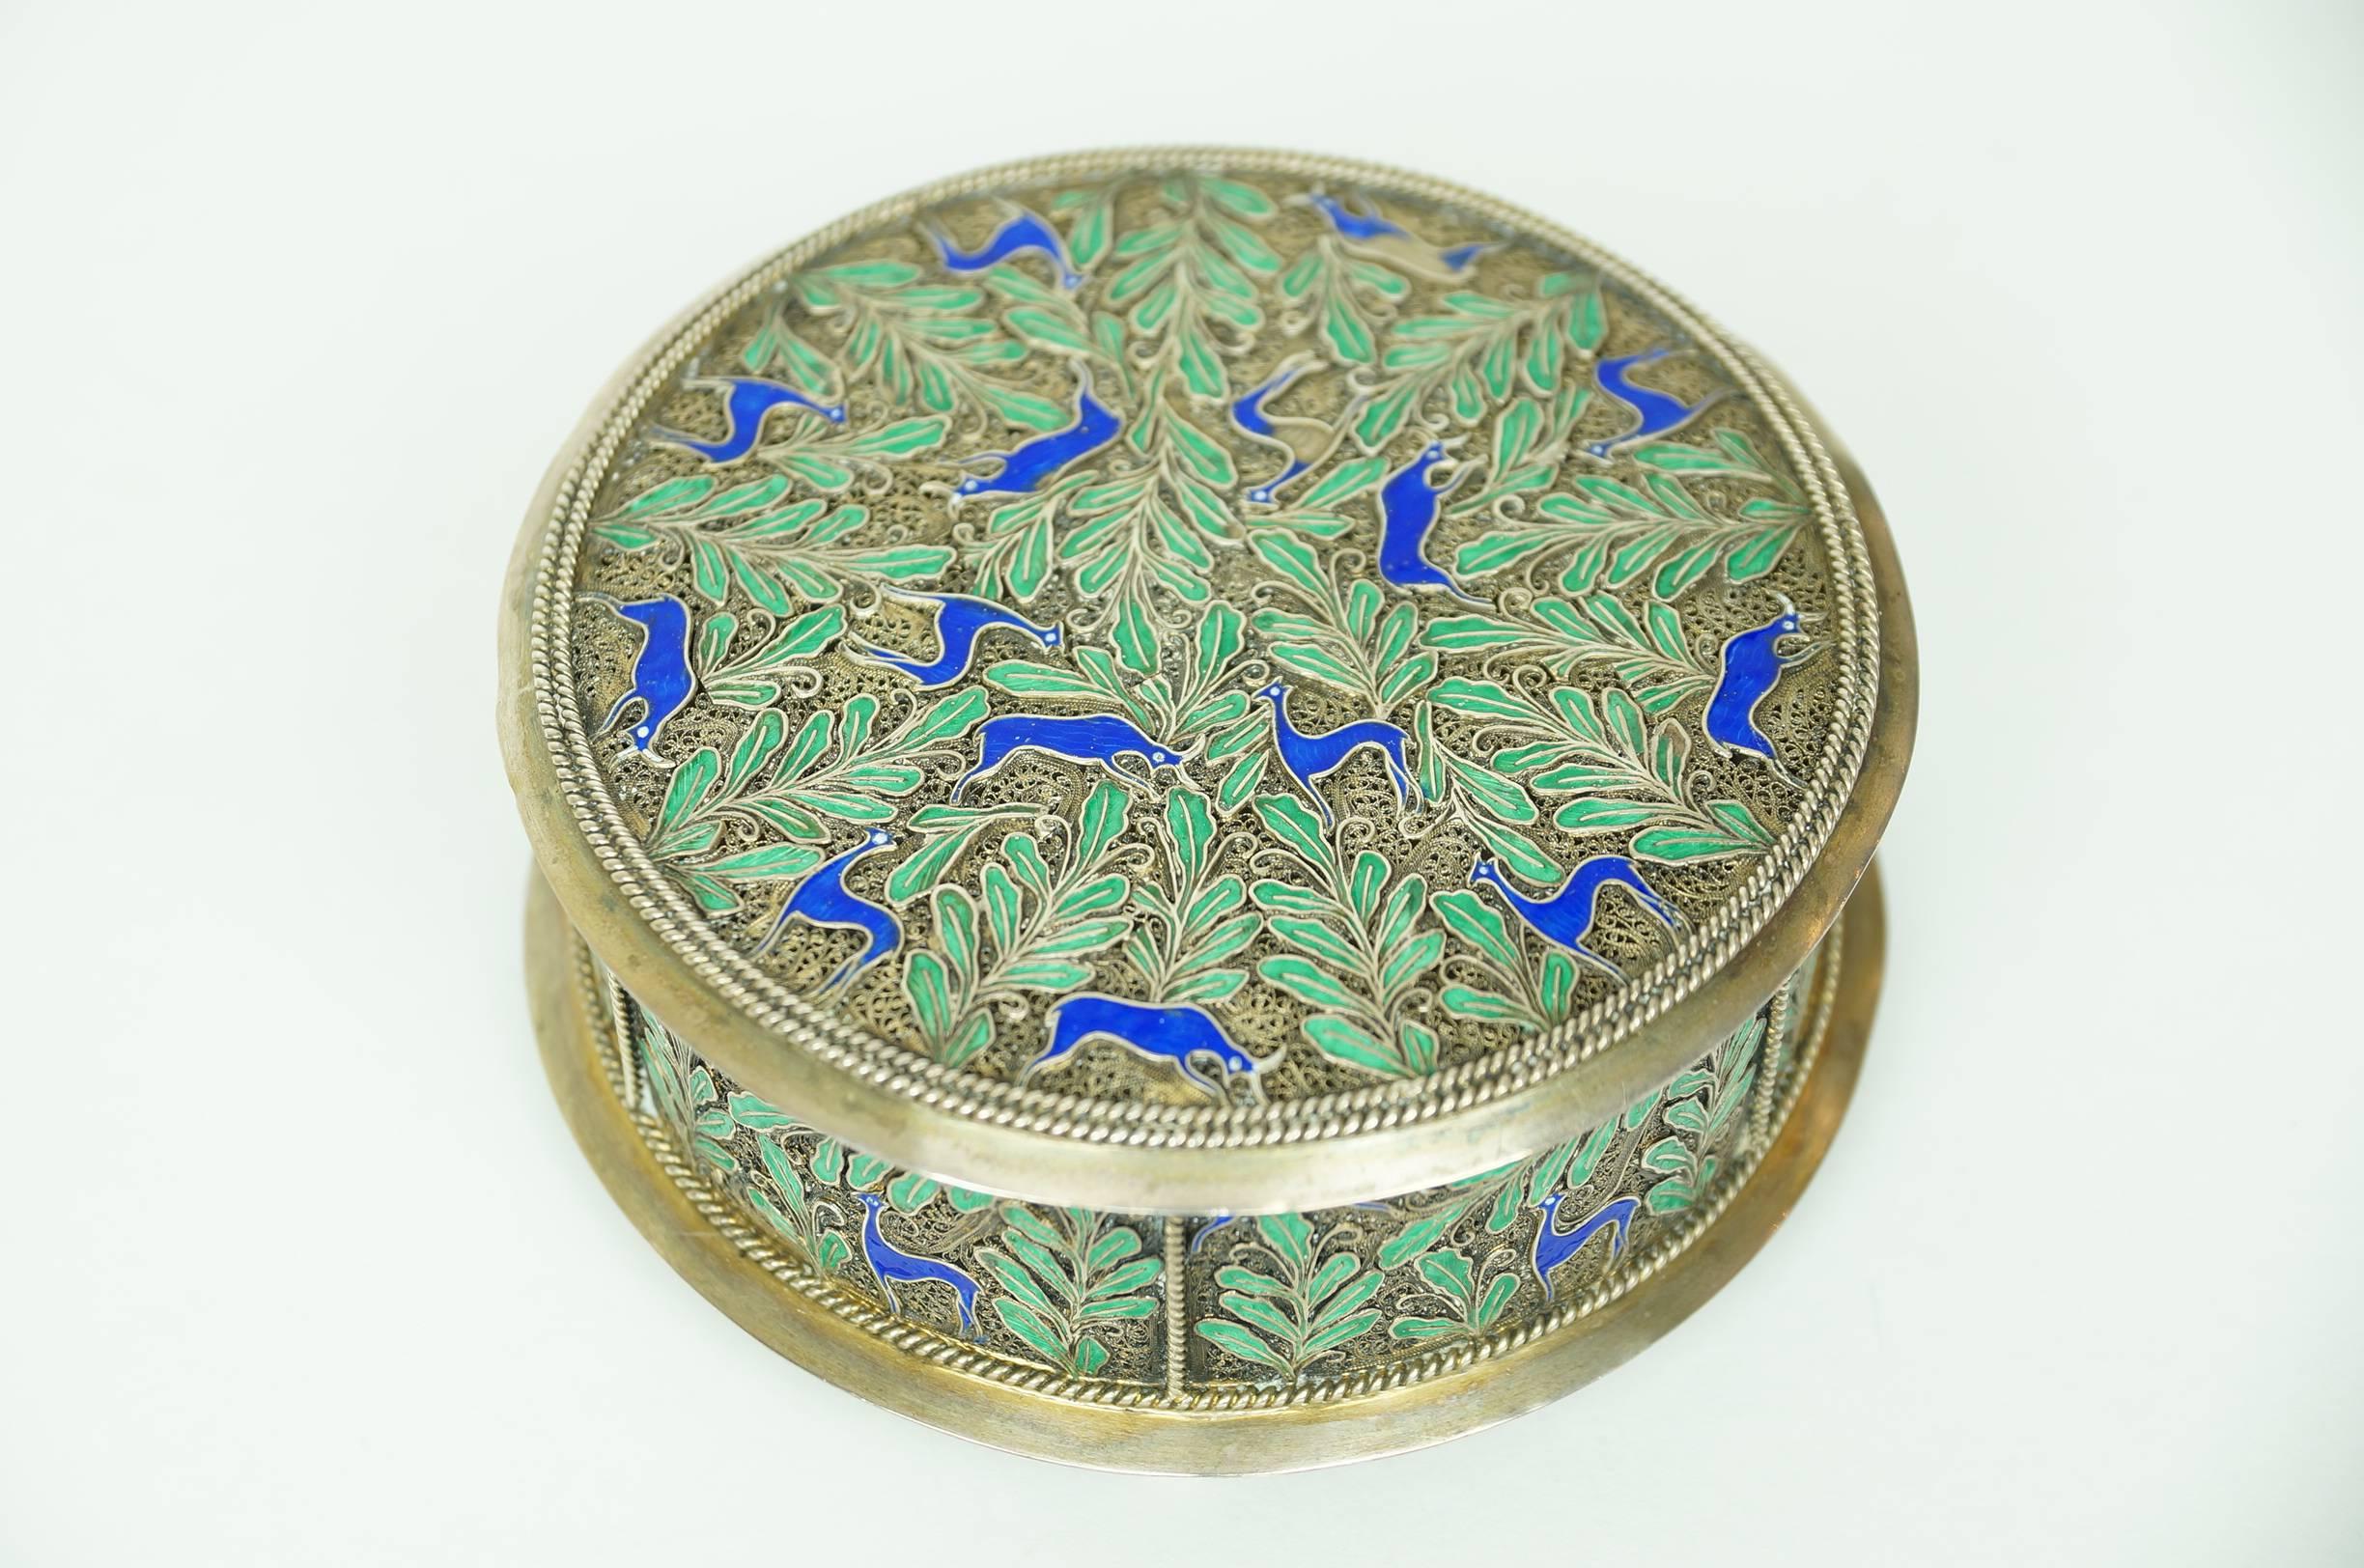 Silver and blue and green enamel round jewelry box with animal figures.
Stock Number: DA194